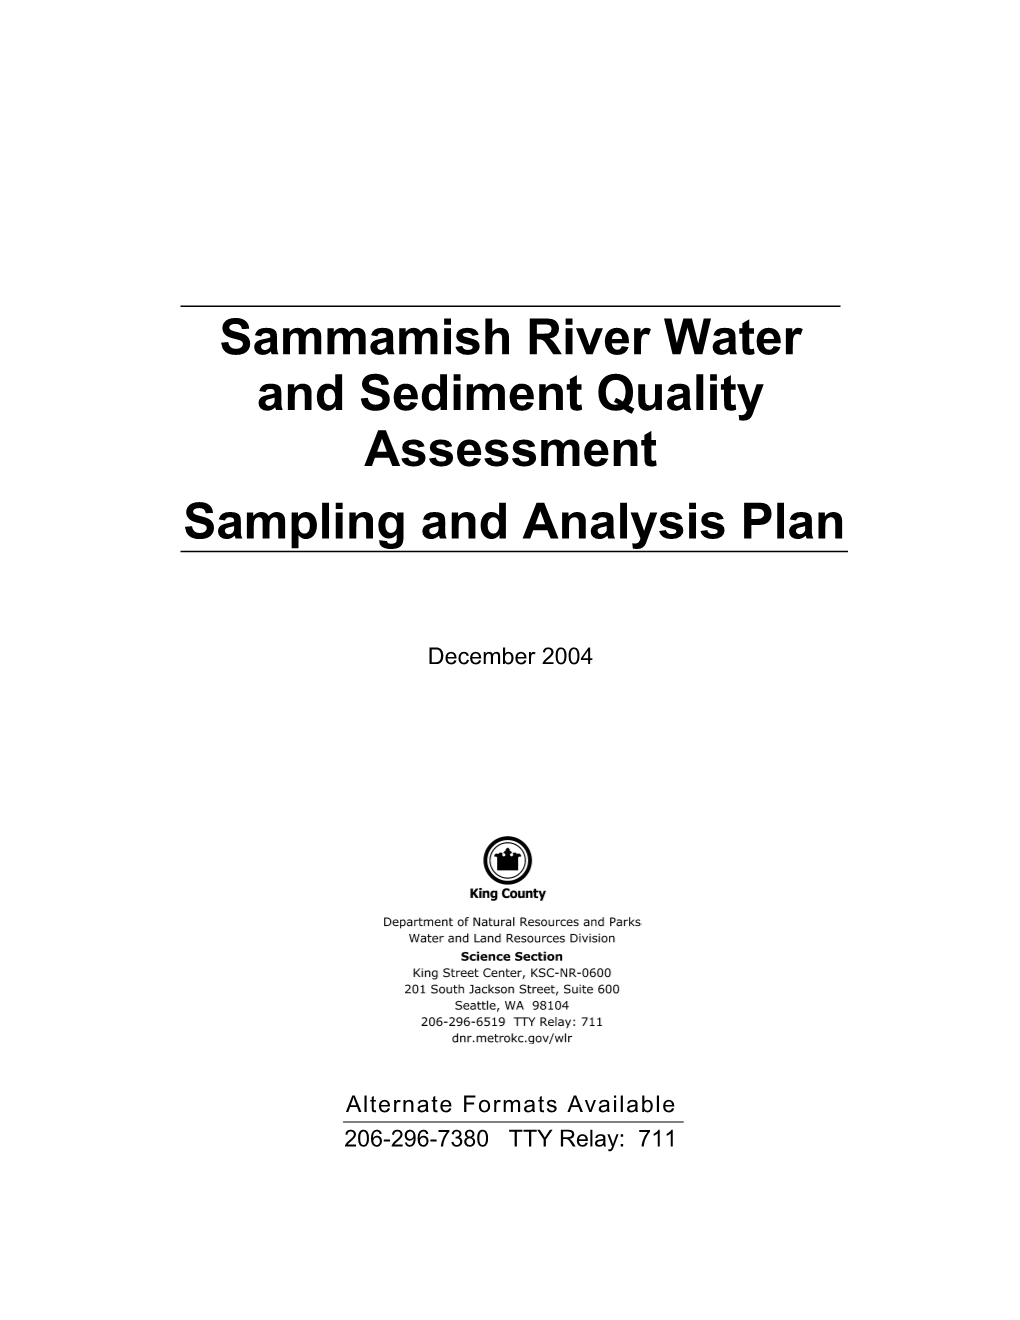 Sammamish River Water and Sediment Quality Assessment